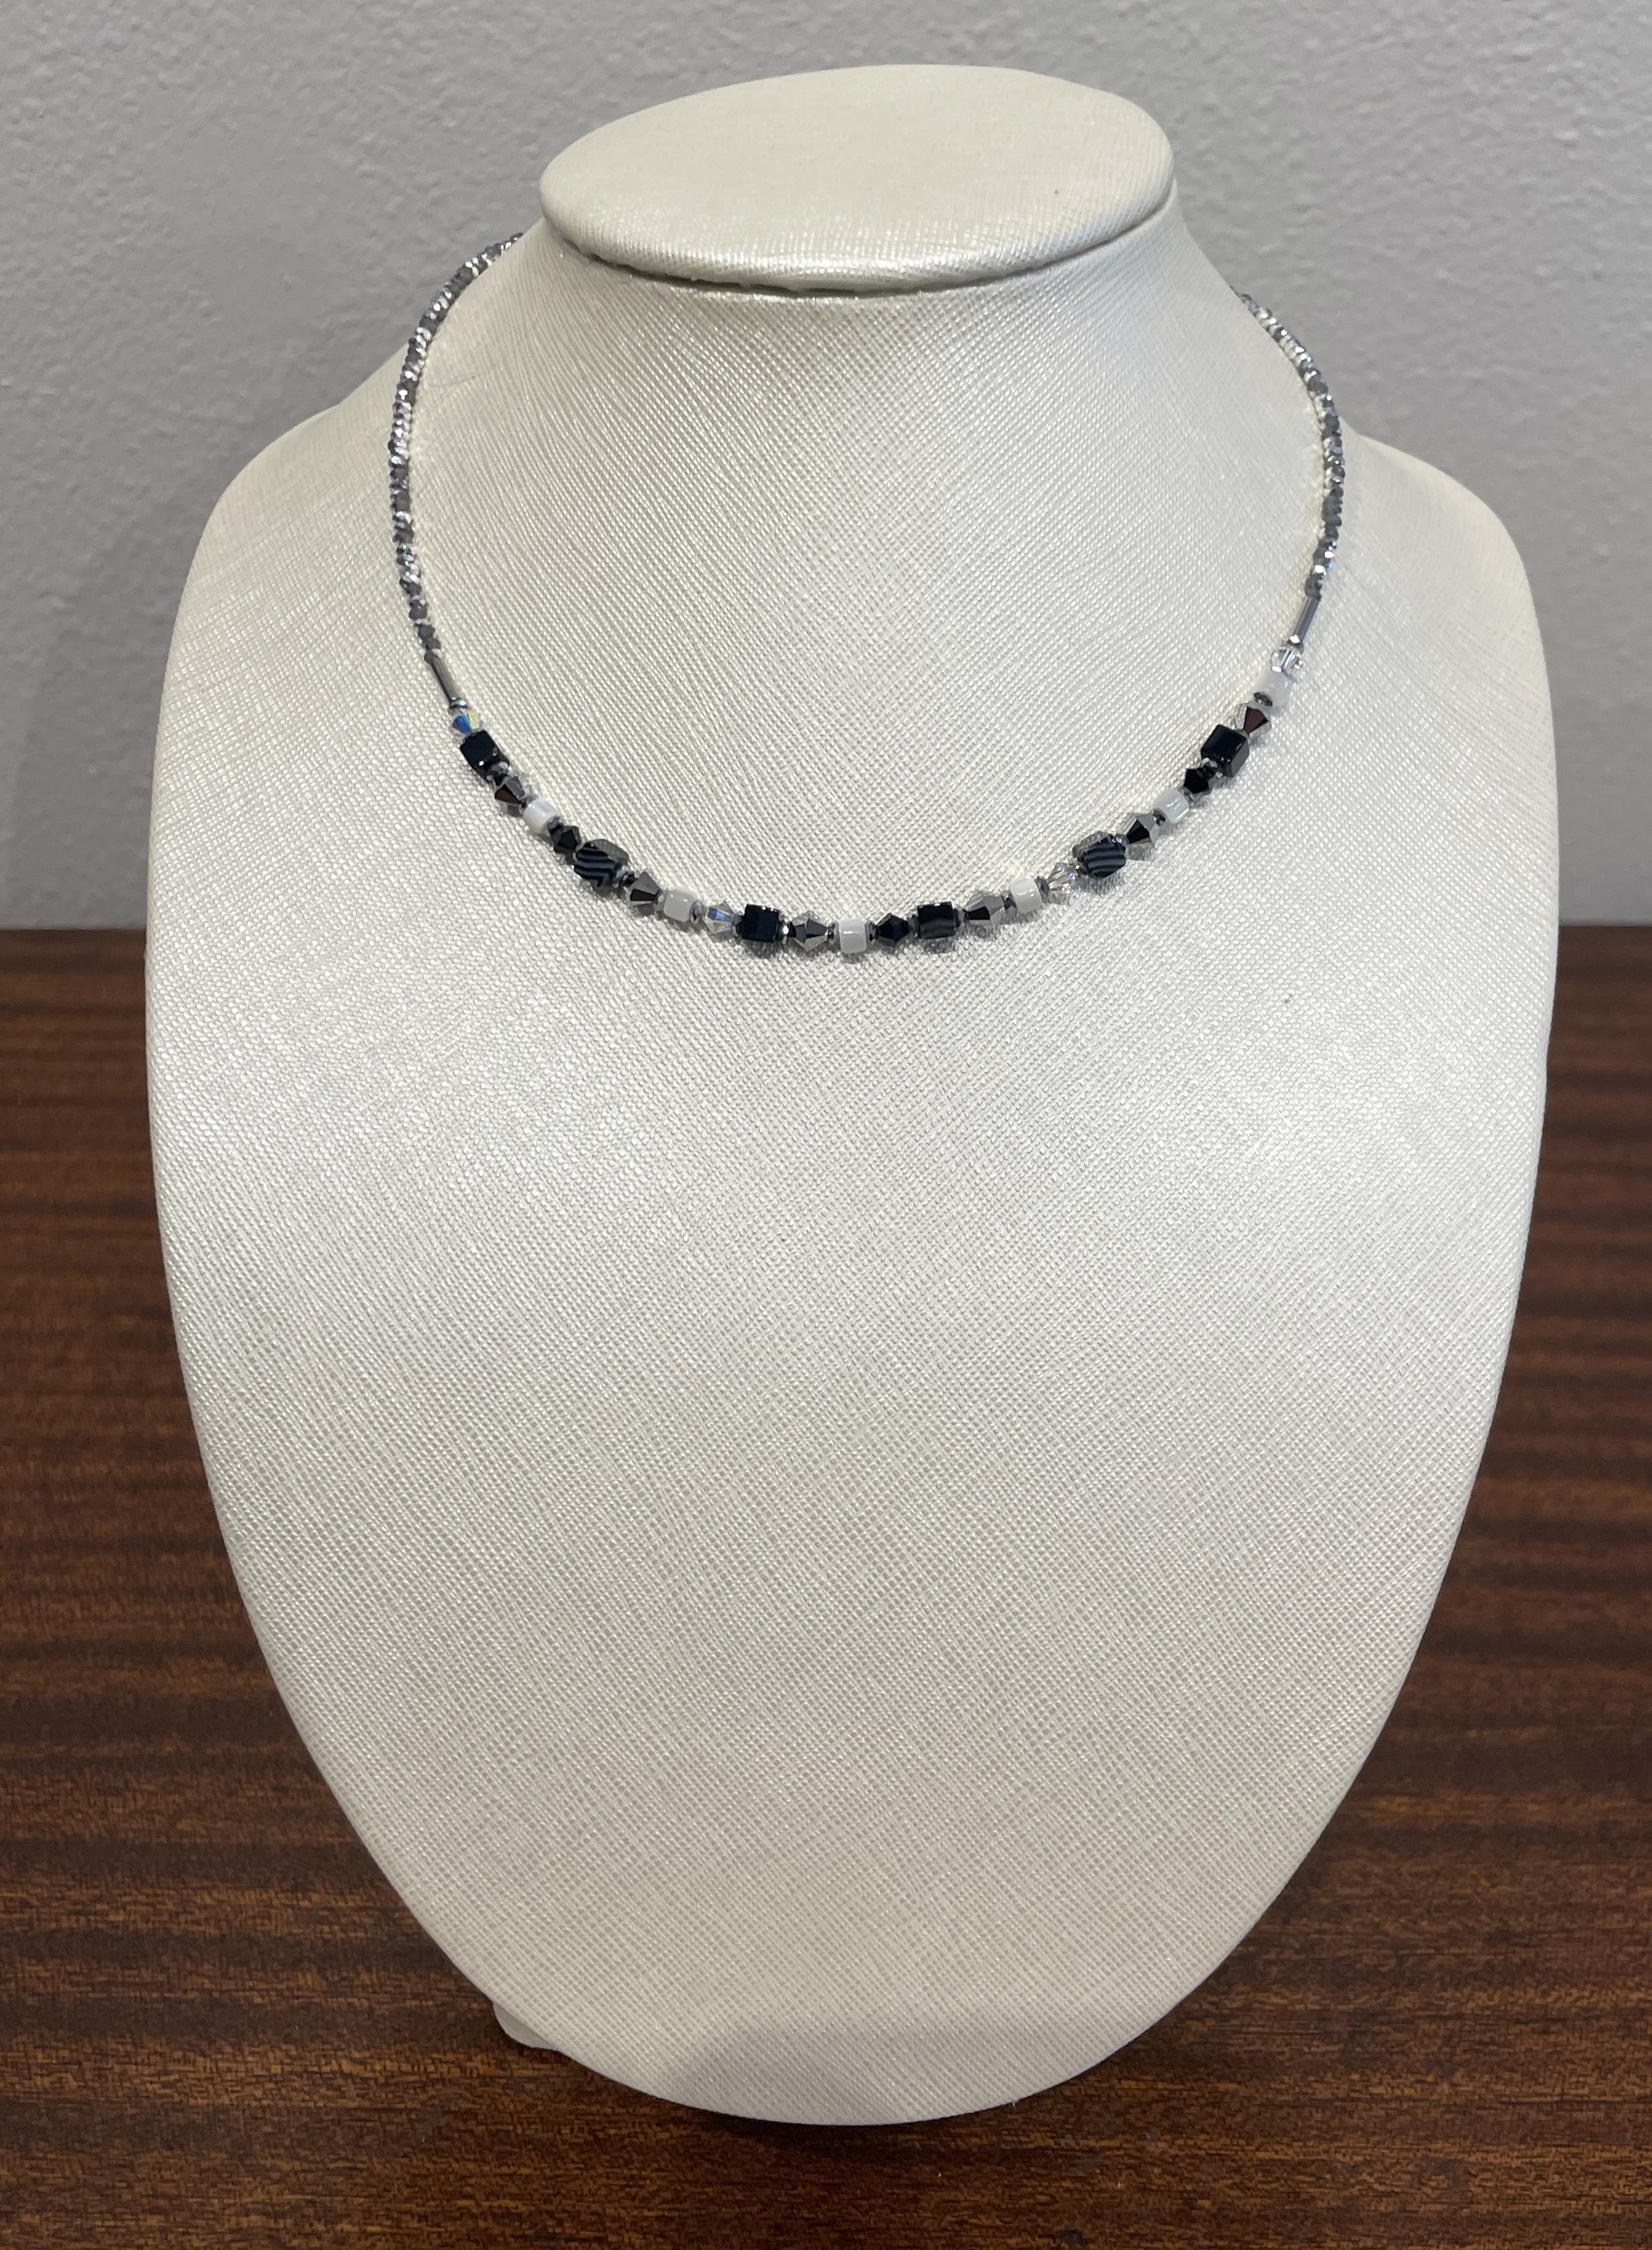 4239/10-1314 Onyx Mother of Pearl Necklace (Silver) by Coeur de Lion Nikaia Inc.